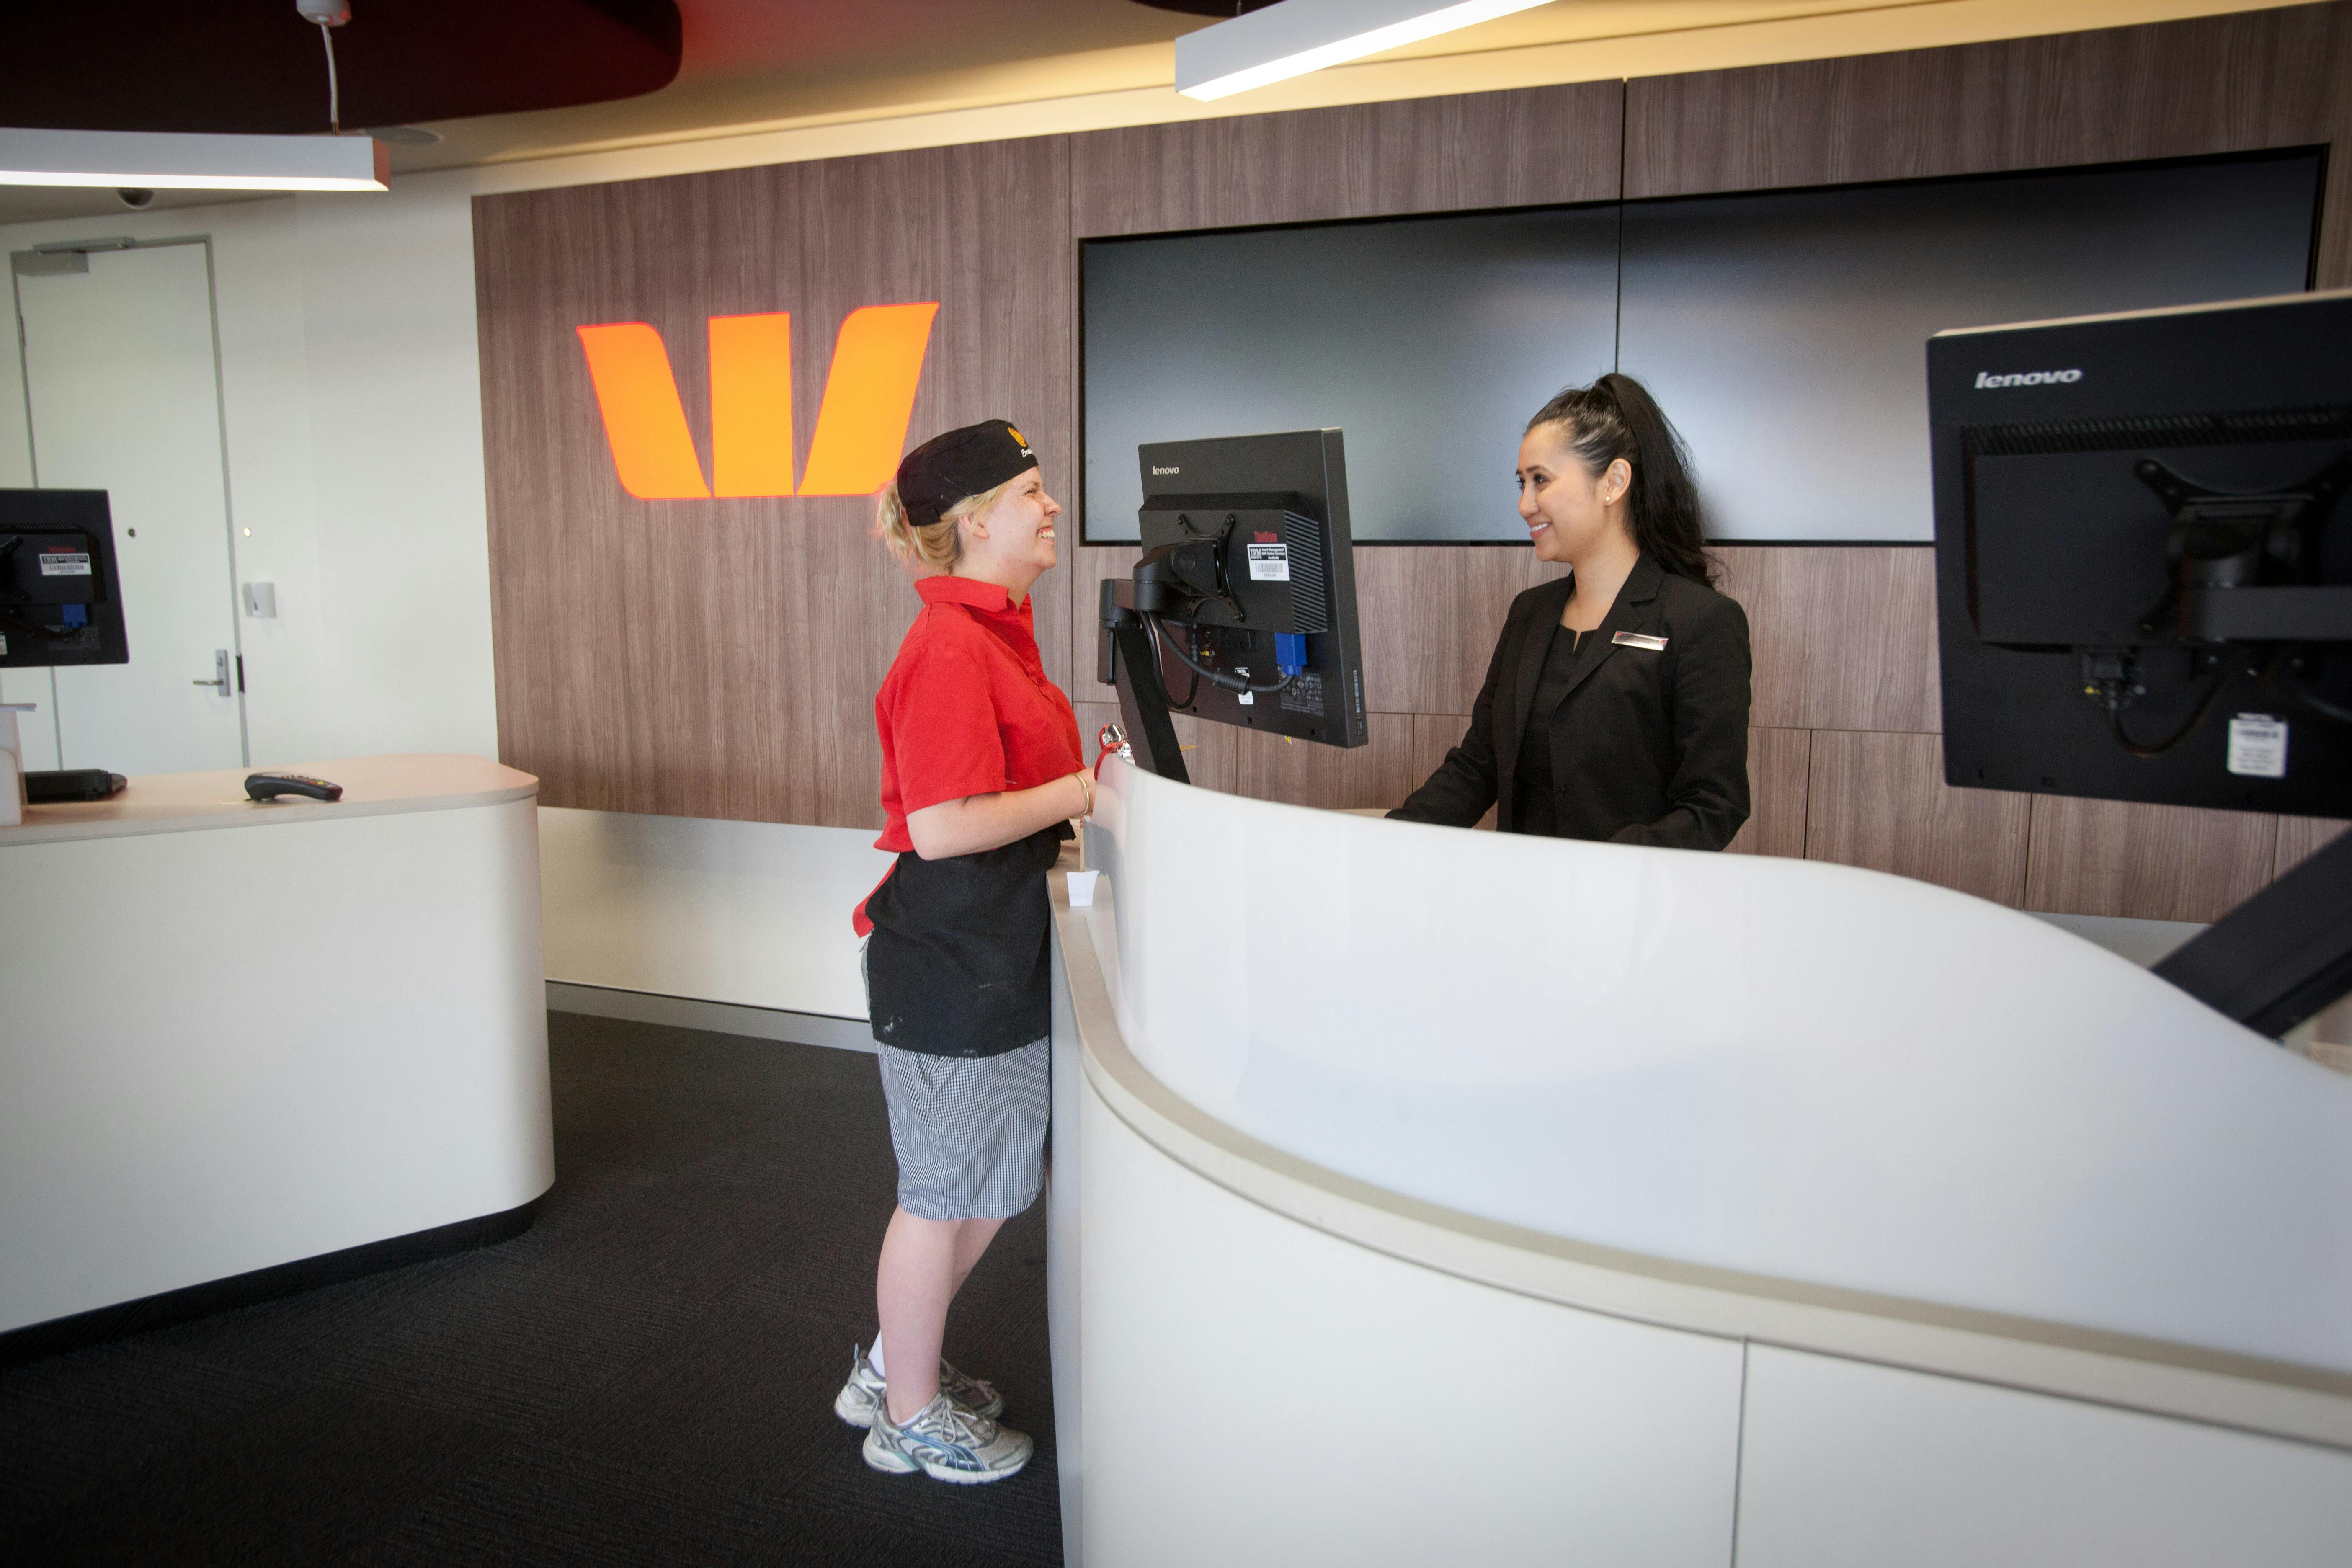 Changes to Westpac's services